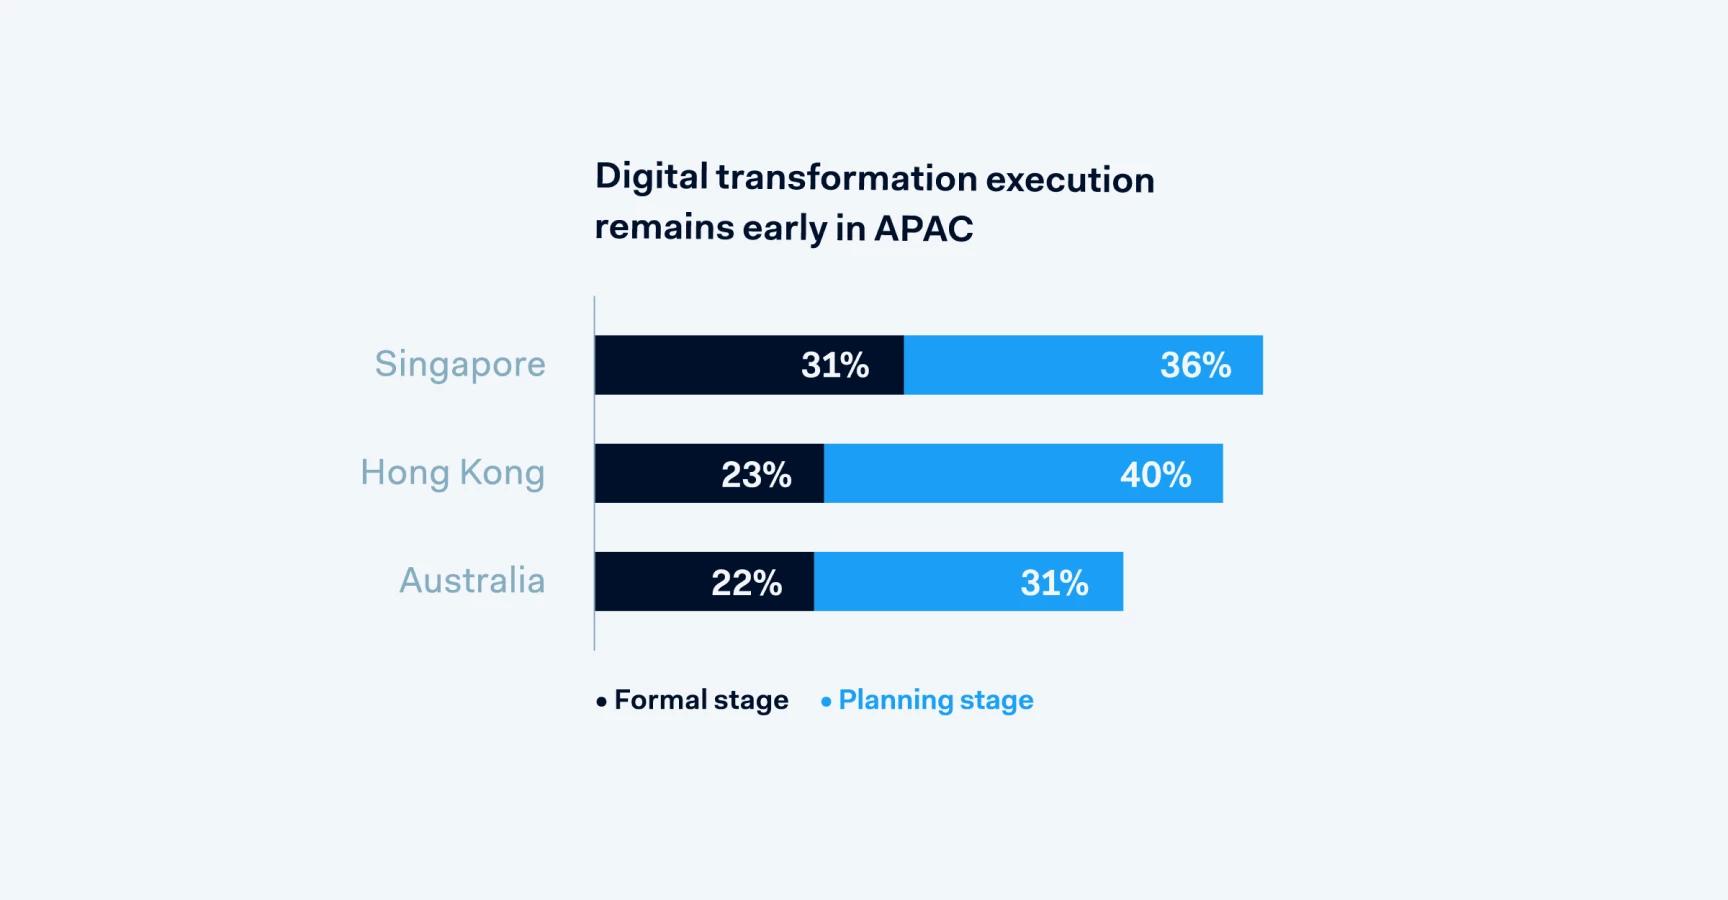 Digital transformation execution remains early in APAC